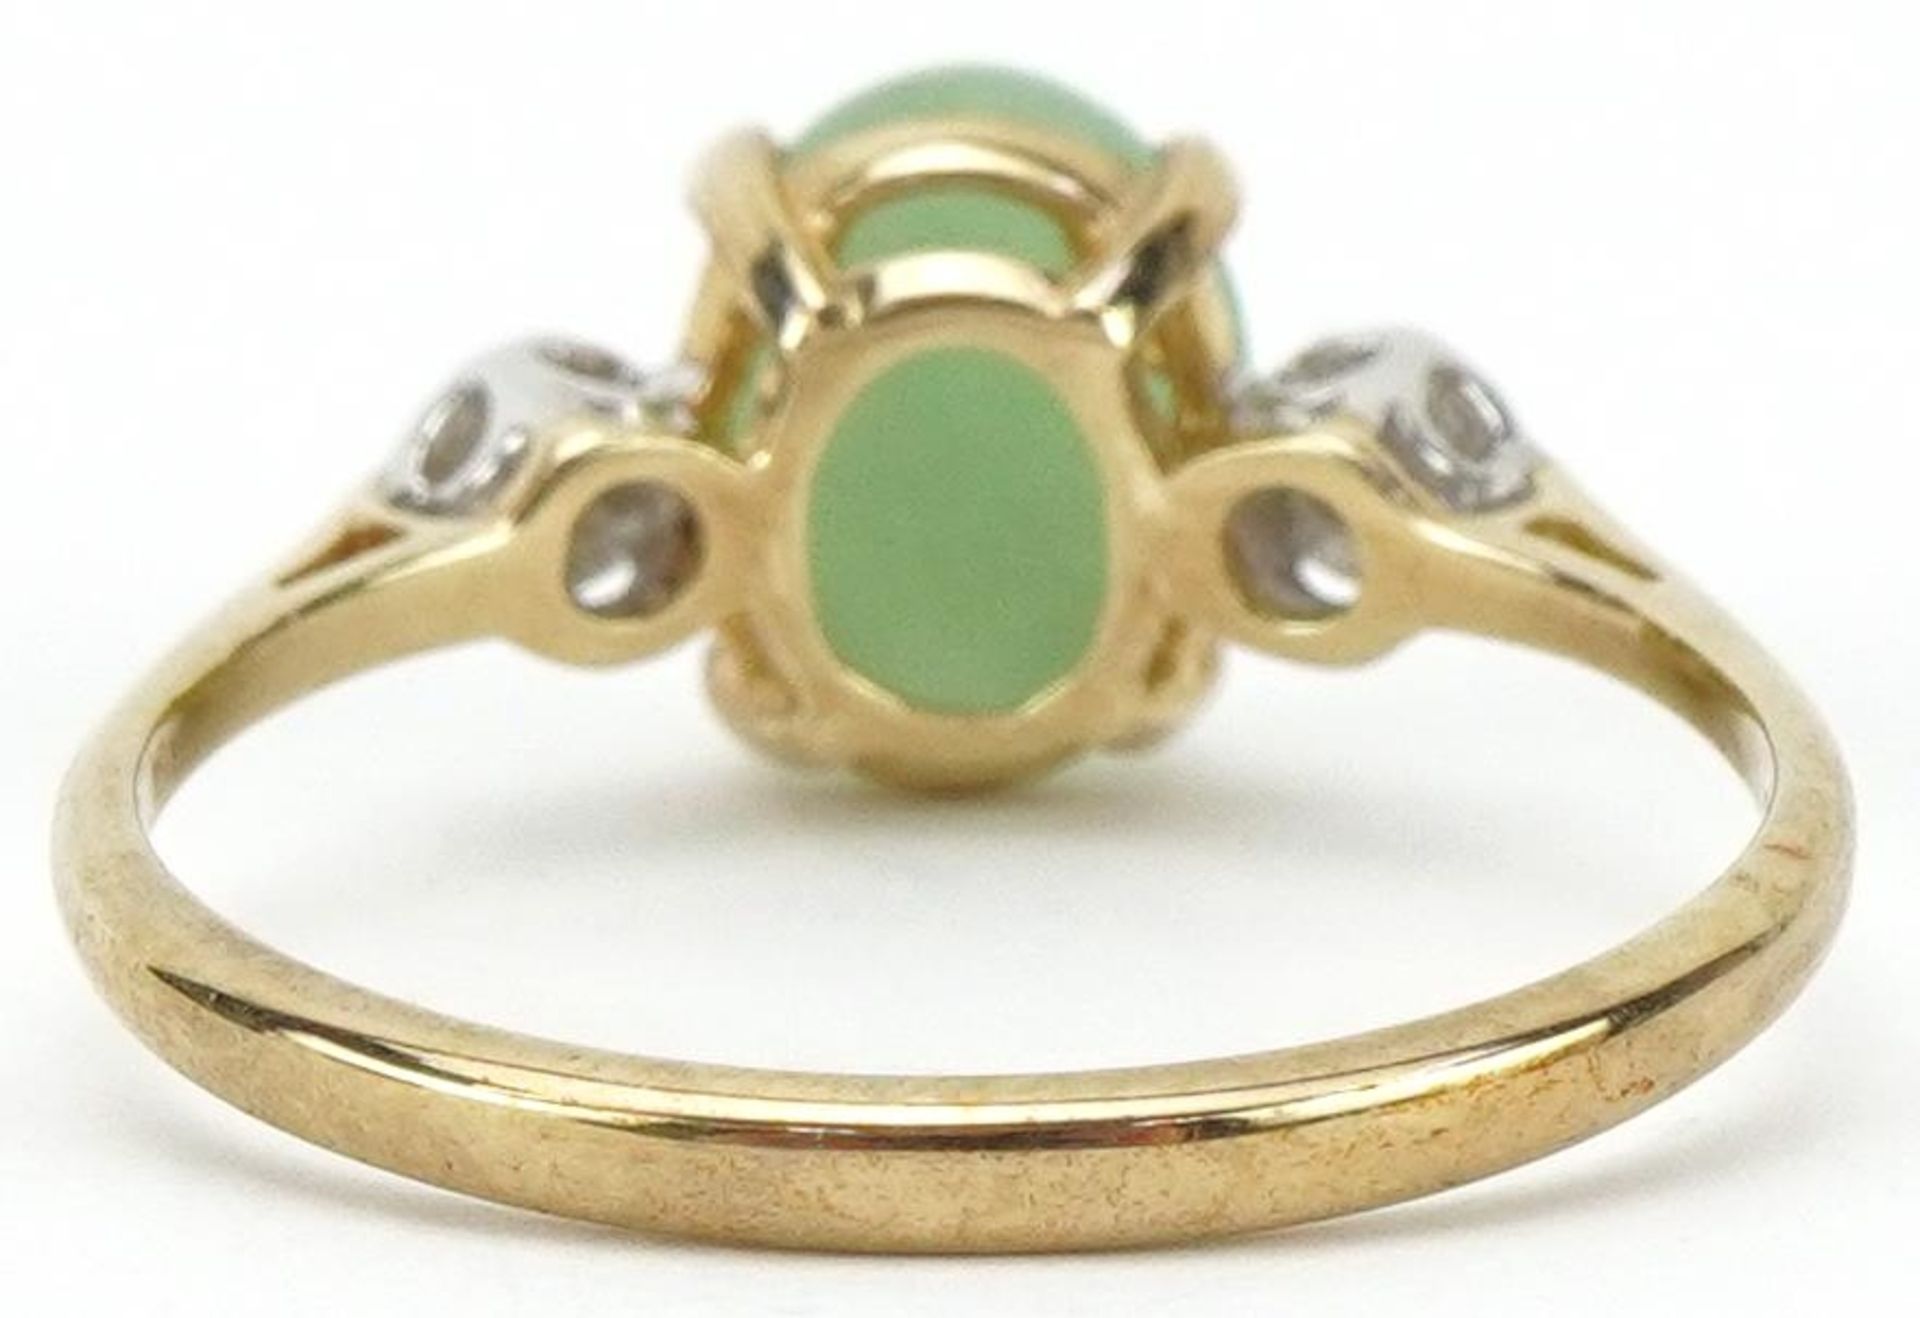 9ct gold cabochon green stone and diamond three stone ring, size Q, 2.2g - Image 2 of 5